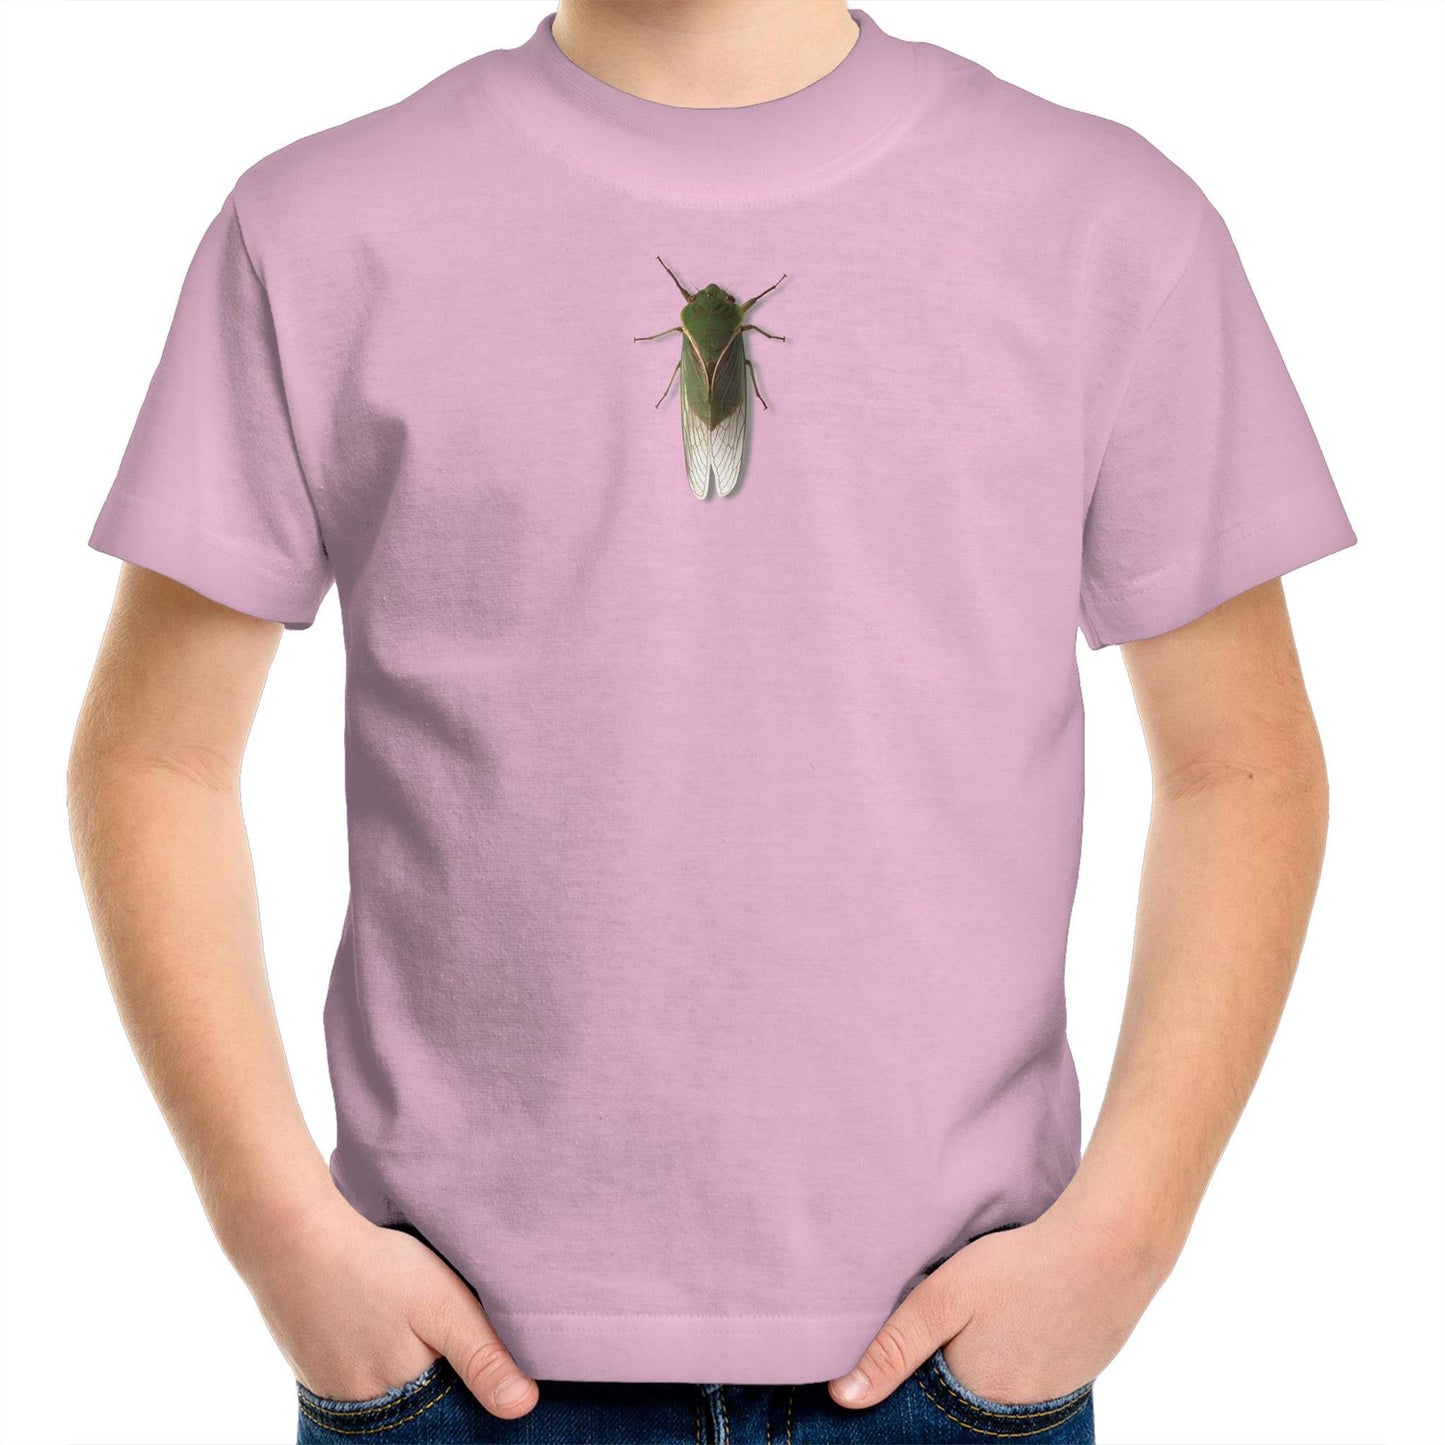 The Little Guy T Shirts for Kids